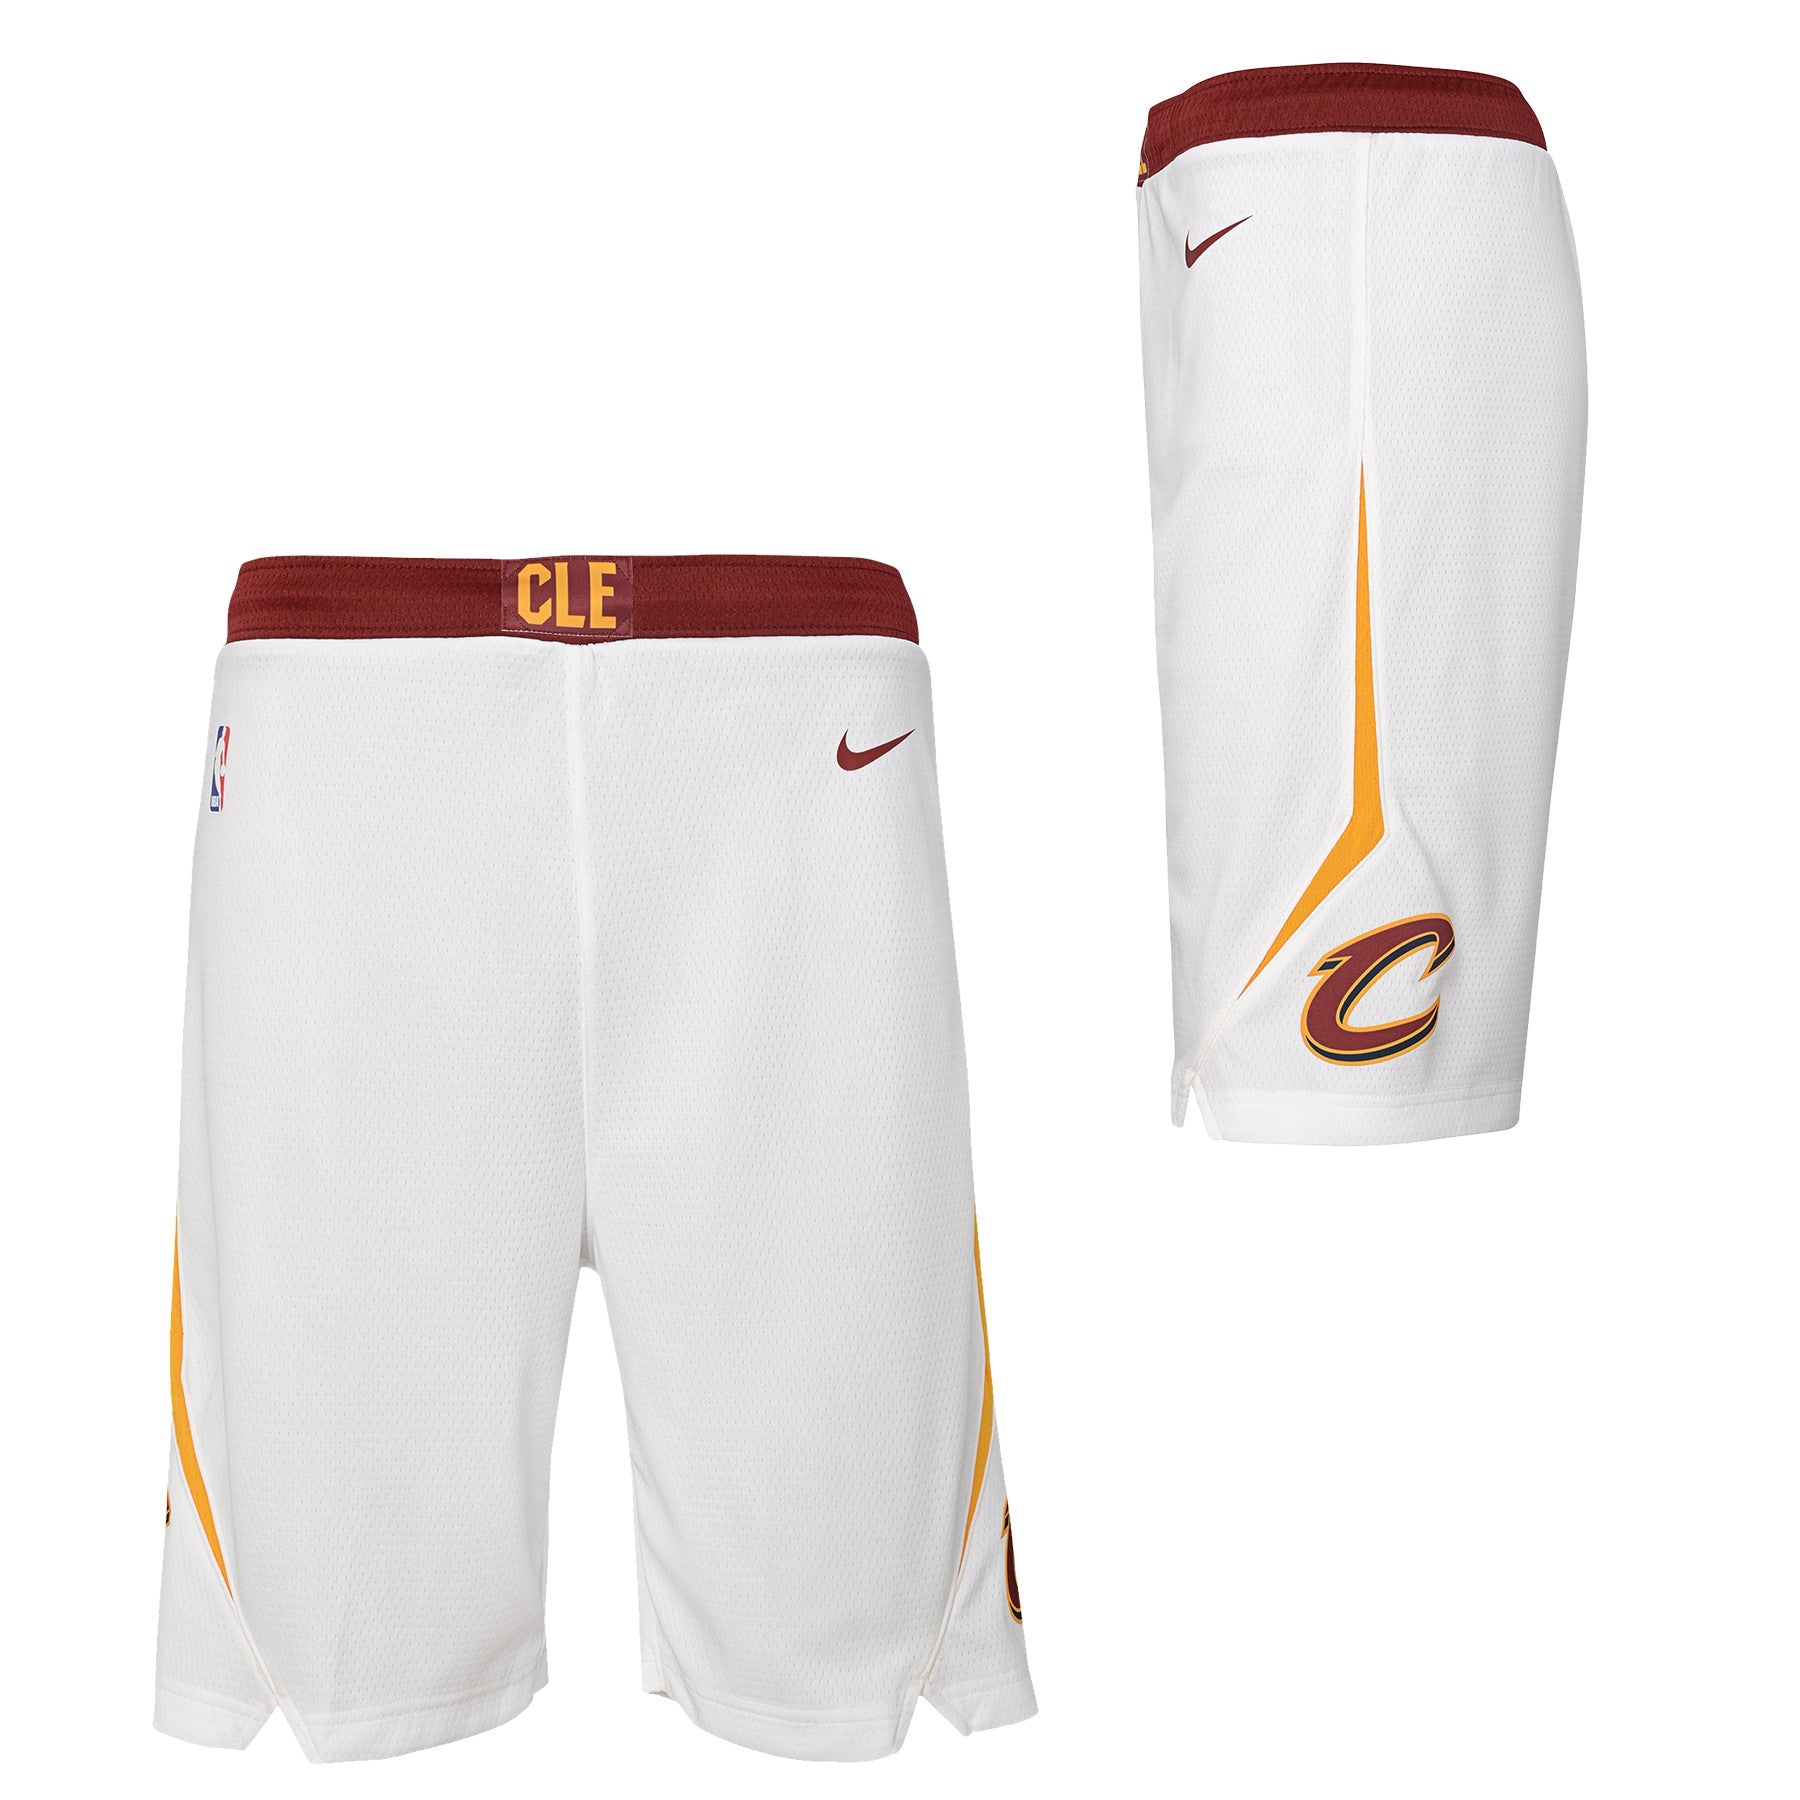 Cleveland Cavaliers Basketball Shorts – Jerseys and Sneakers